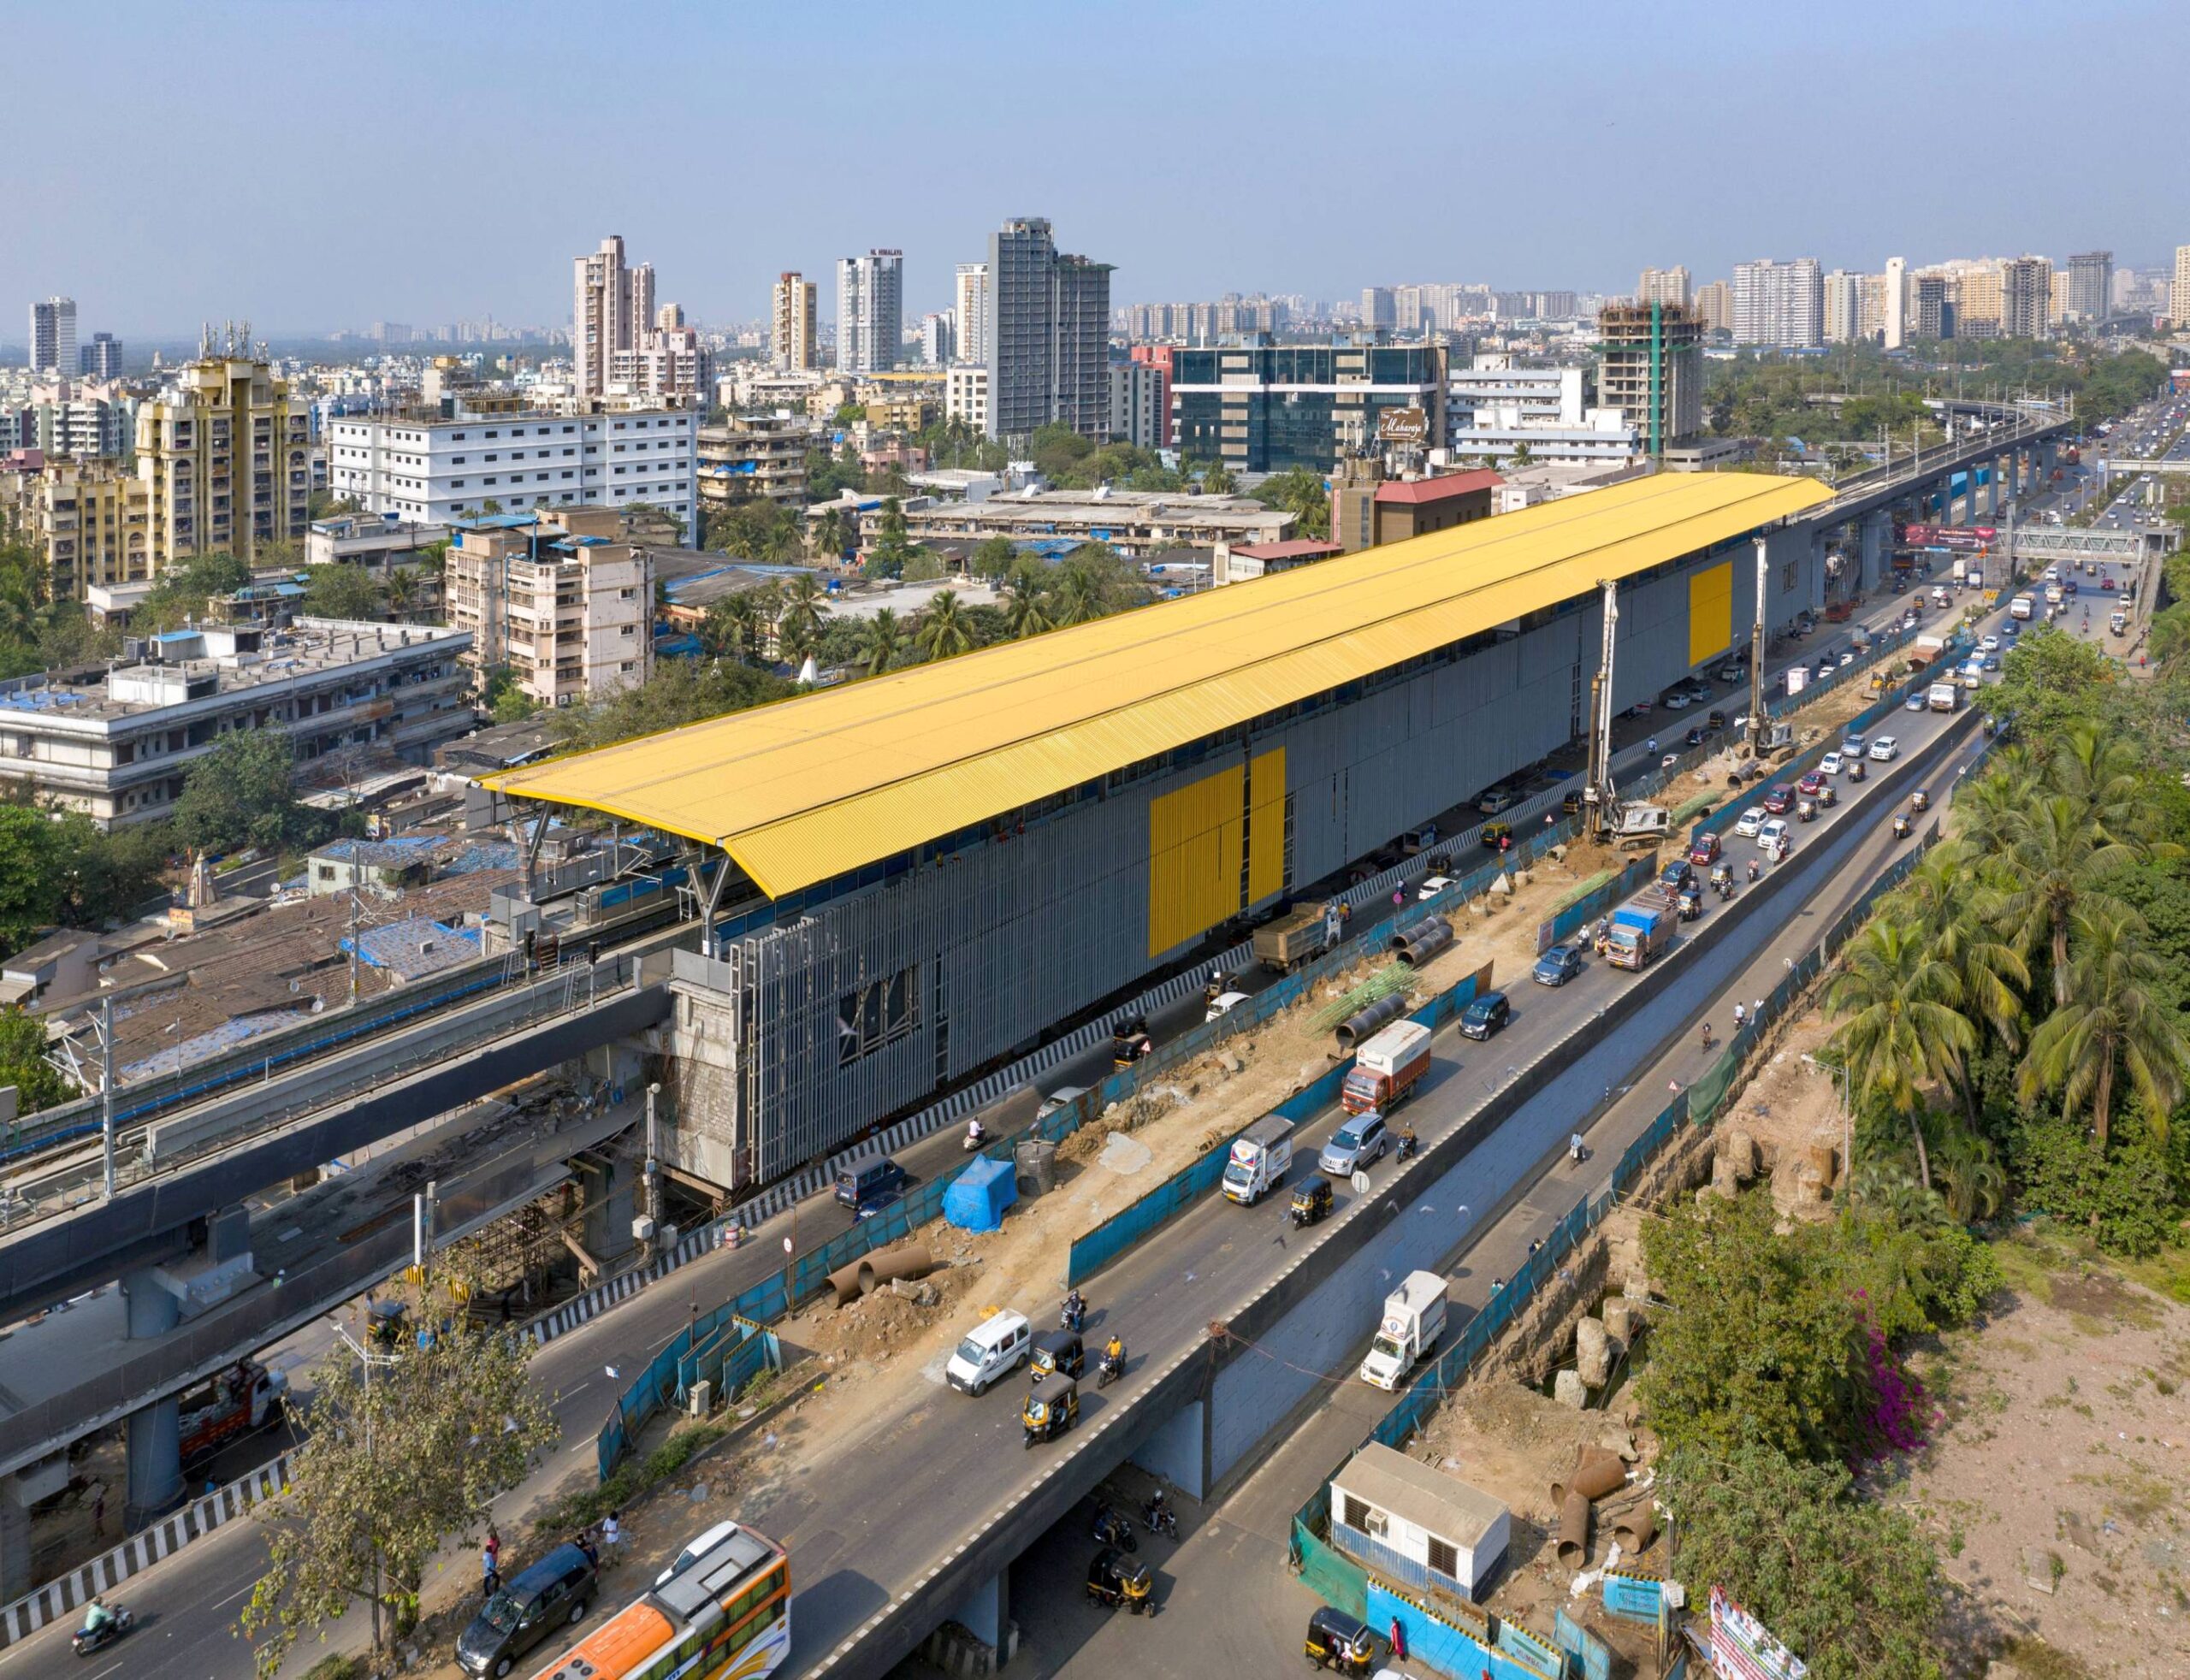 Mumbai Metro Stations-A case for Architects and Architecture-Sourabh Gupta, Archohm 89